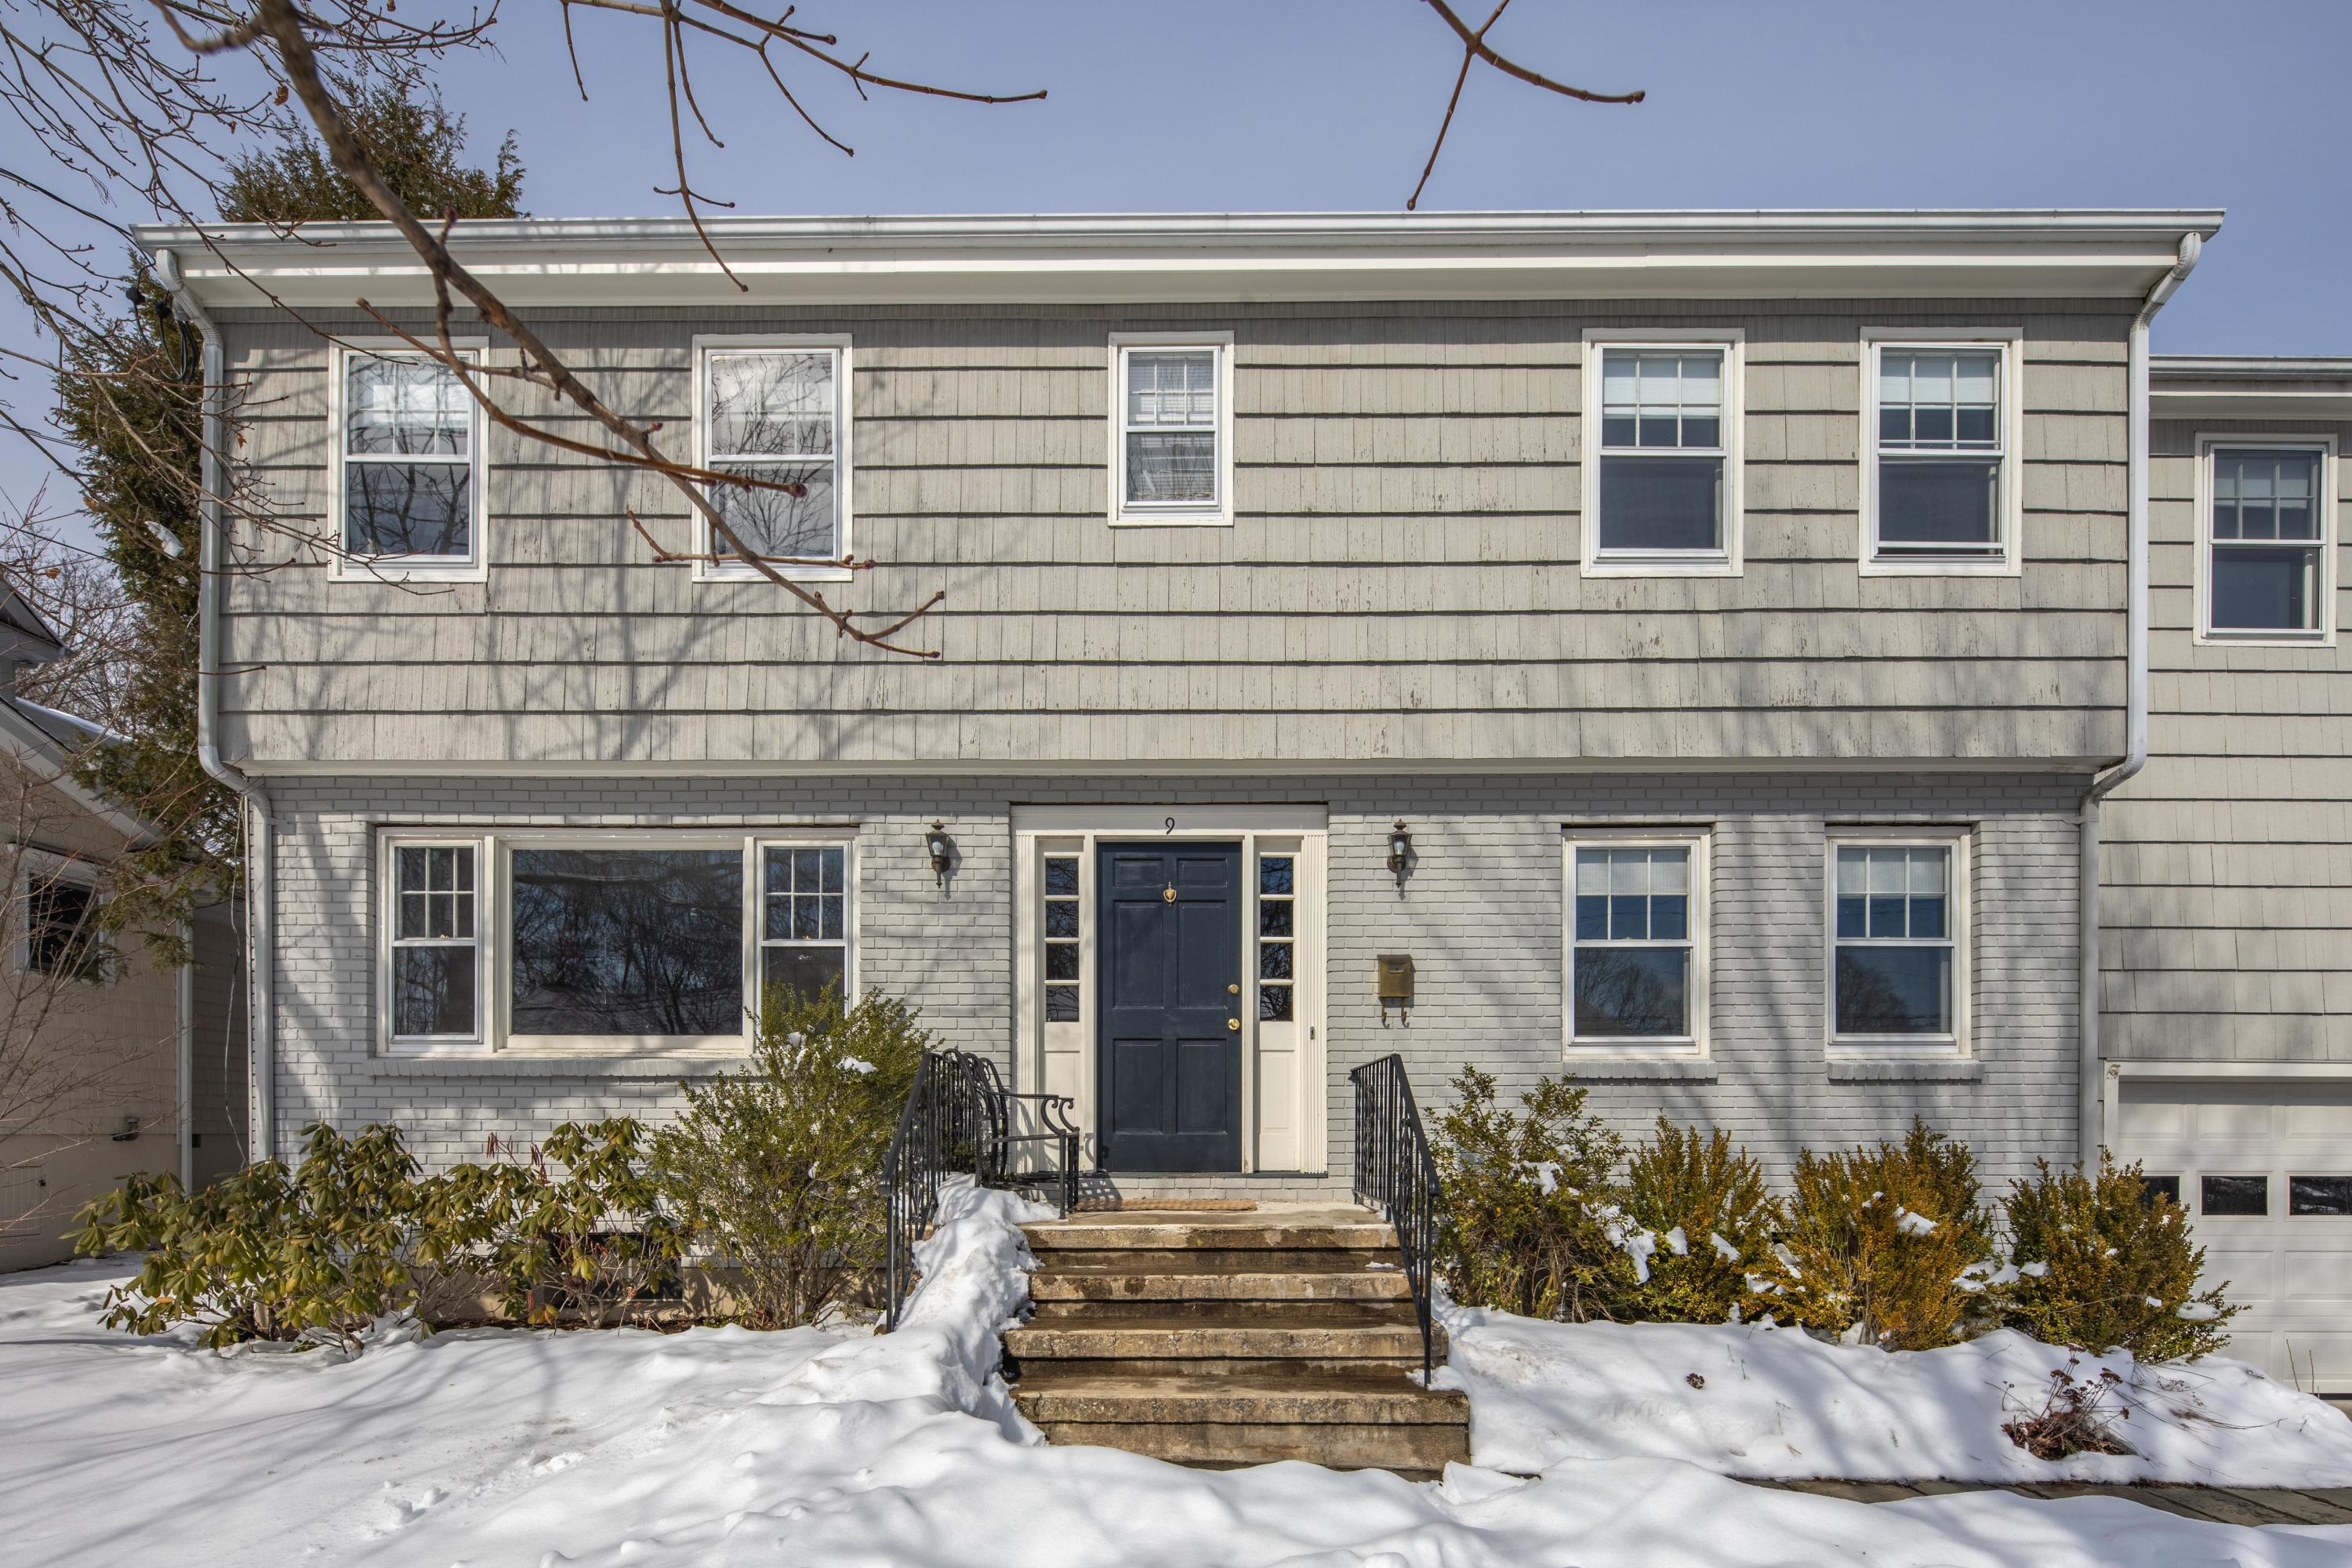 9 Grace St, New Canaan, CT 06840-3